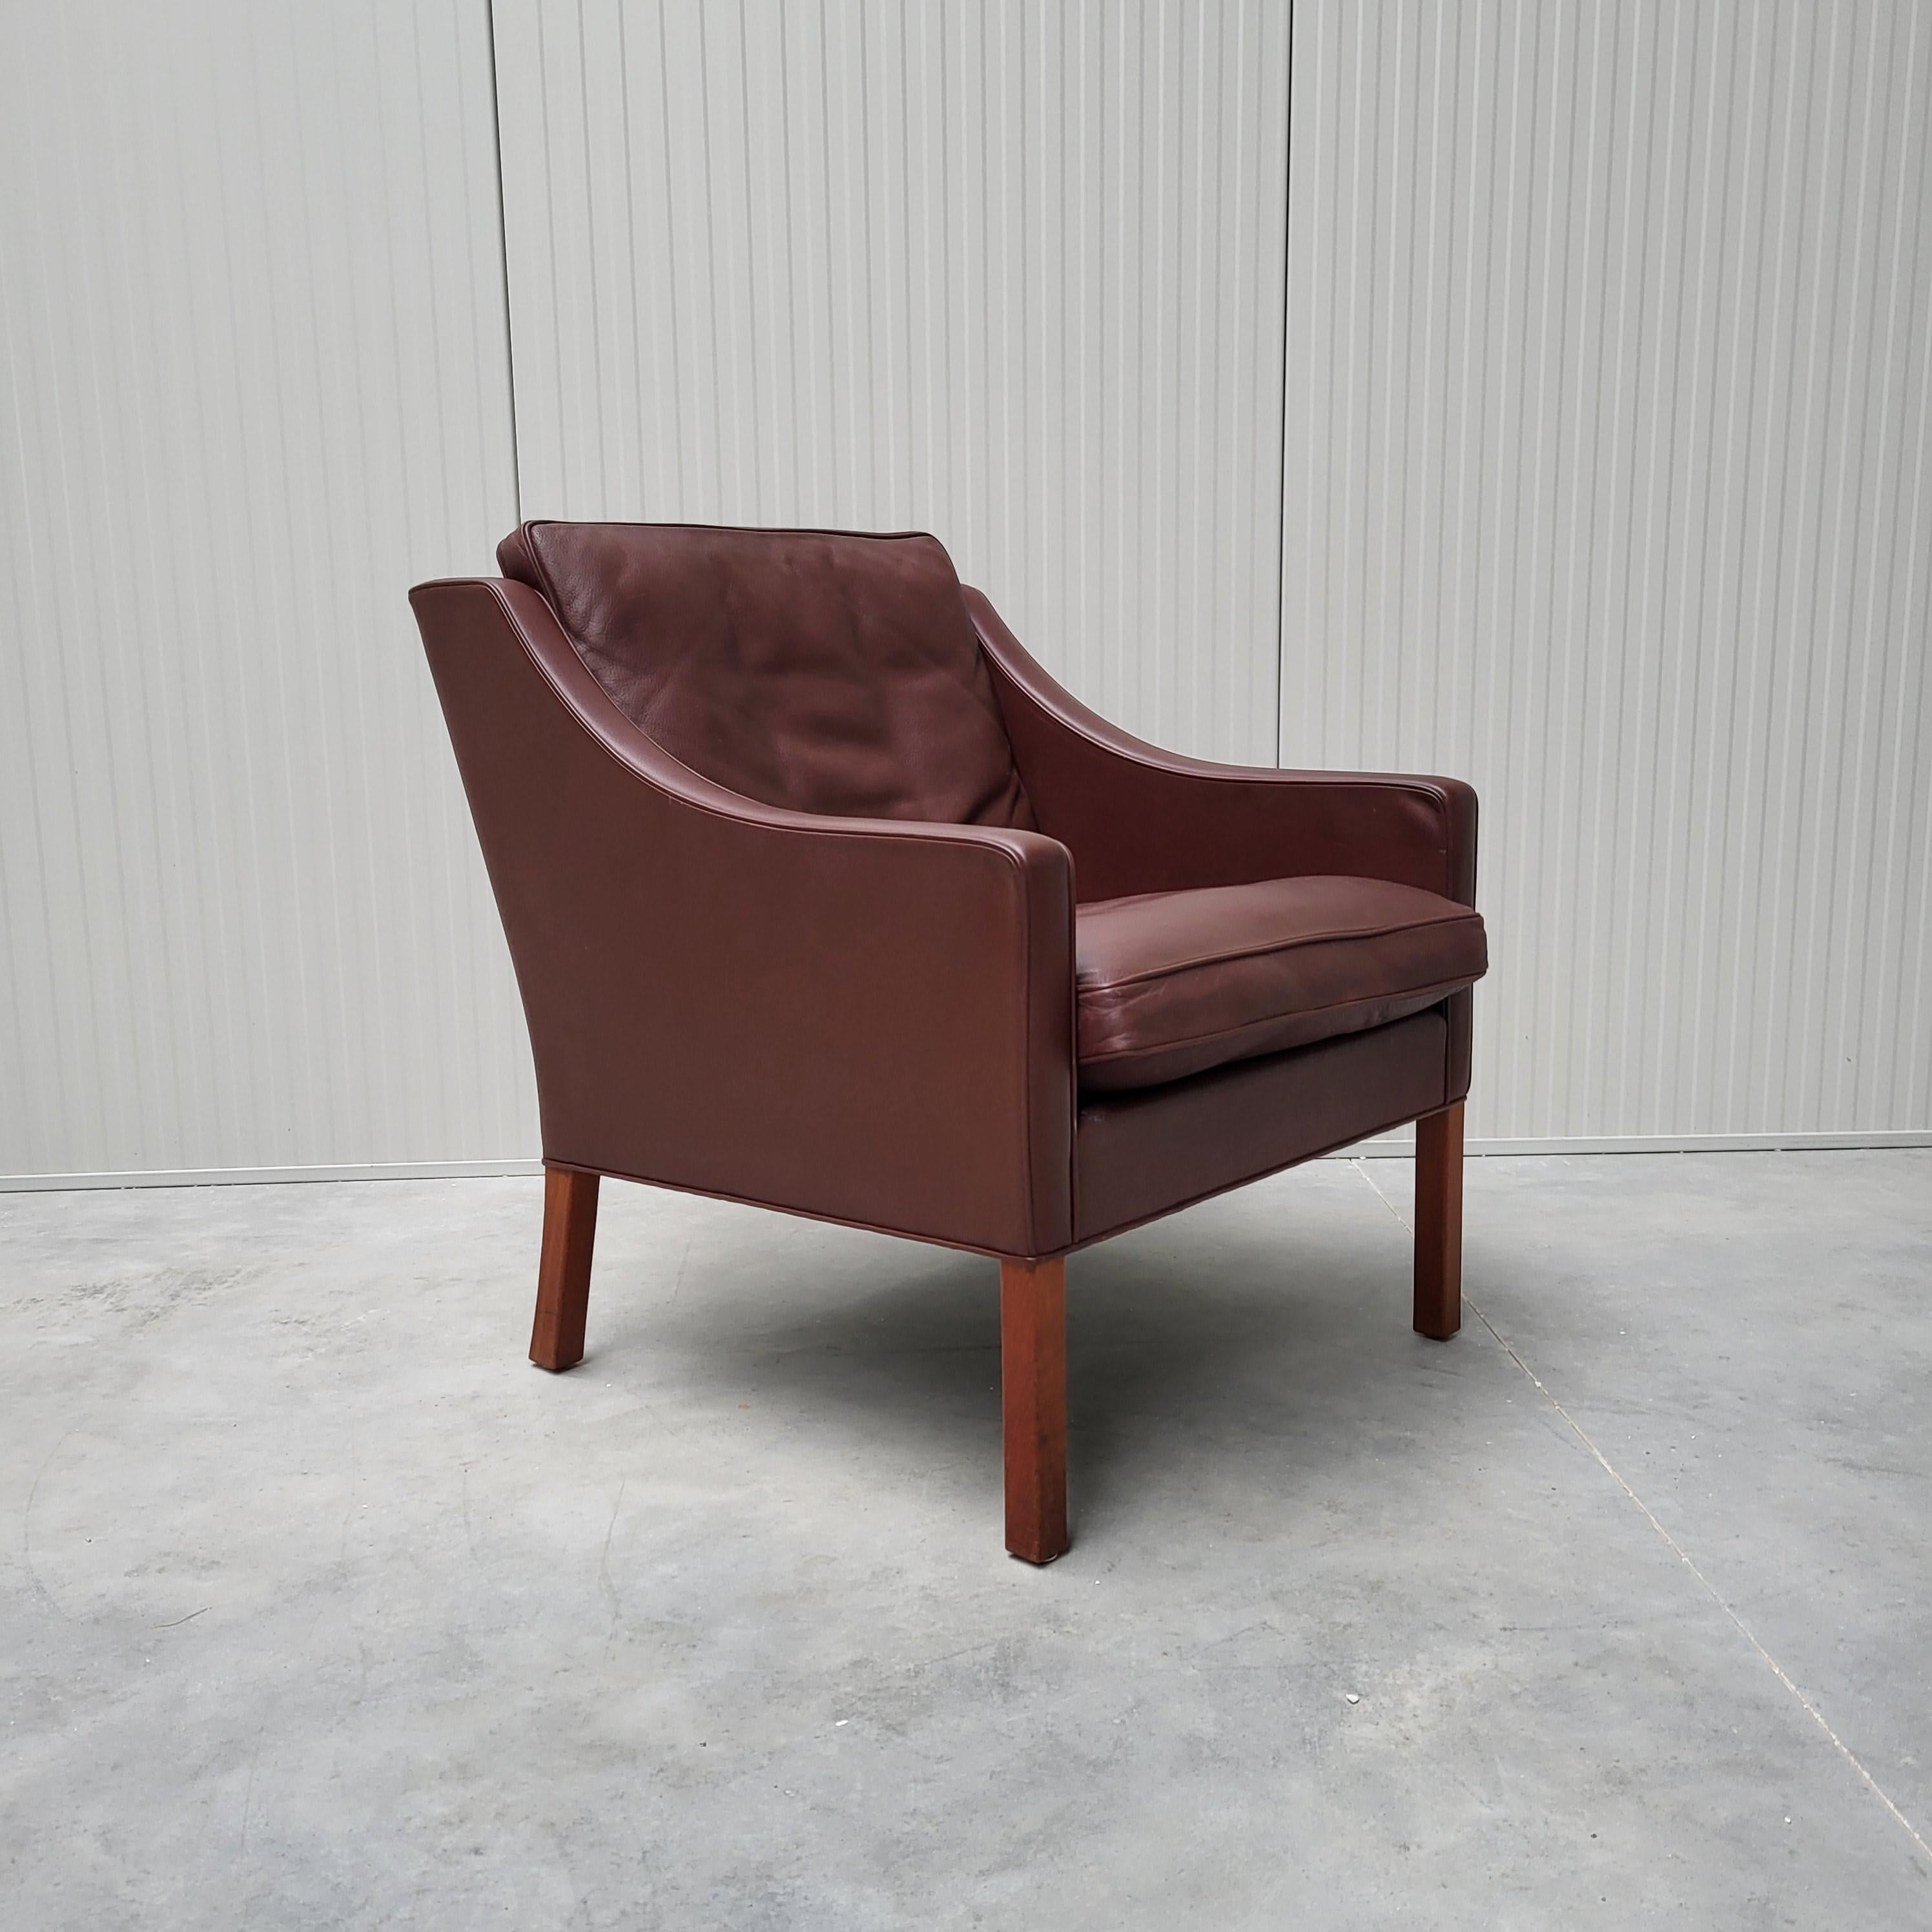 Hand-Crafted Børge Mogensen for Fredericia Club Chairs Mod. 2207 Denmark 1960s